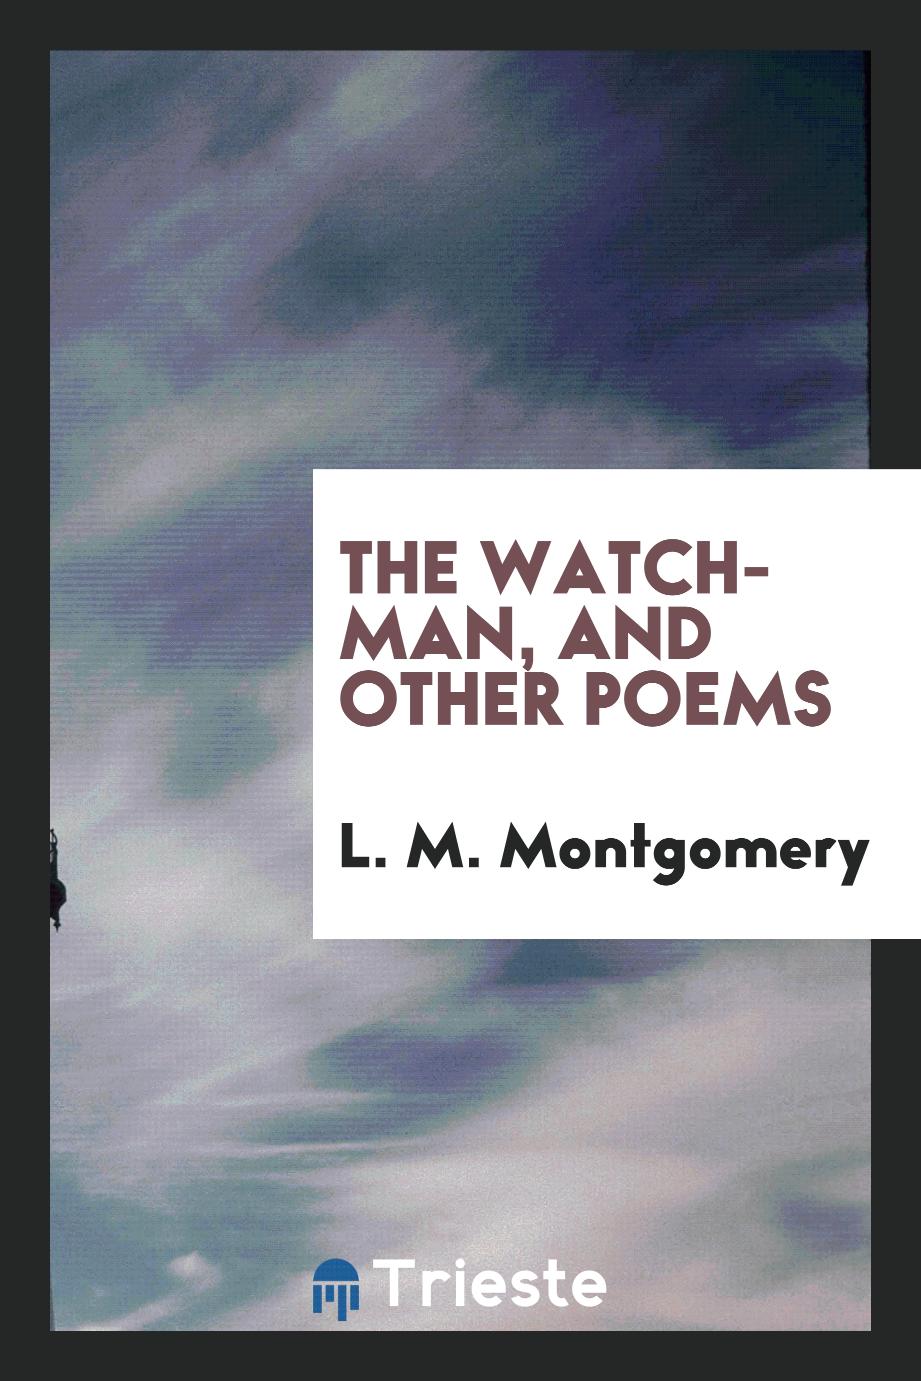 The watchman, and other poems